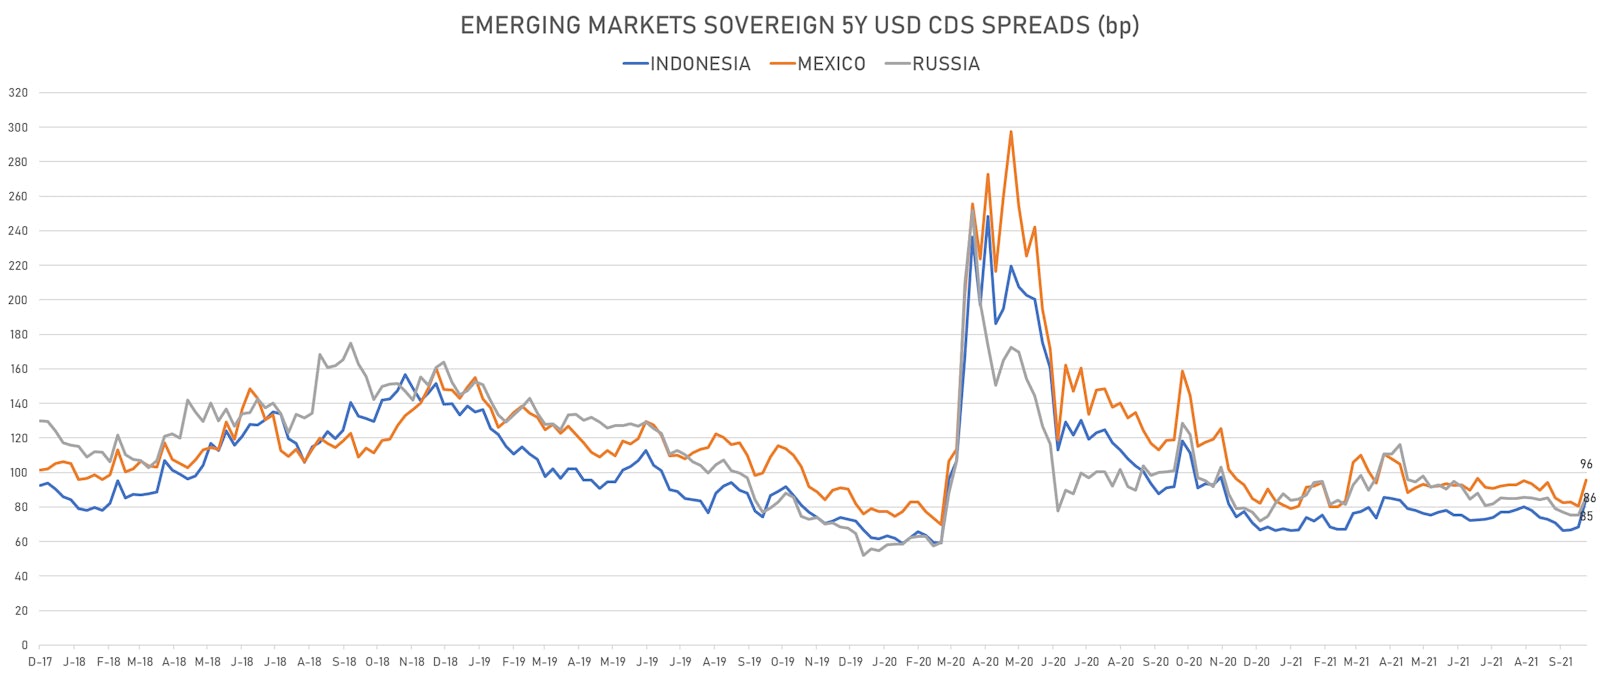 EM CDS Spreads Are Widening Again, And Their Currencies Weakening On The Bid To Quality | Sources: ϕpost, Refinitiv data